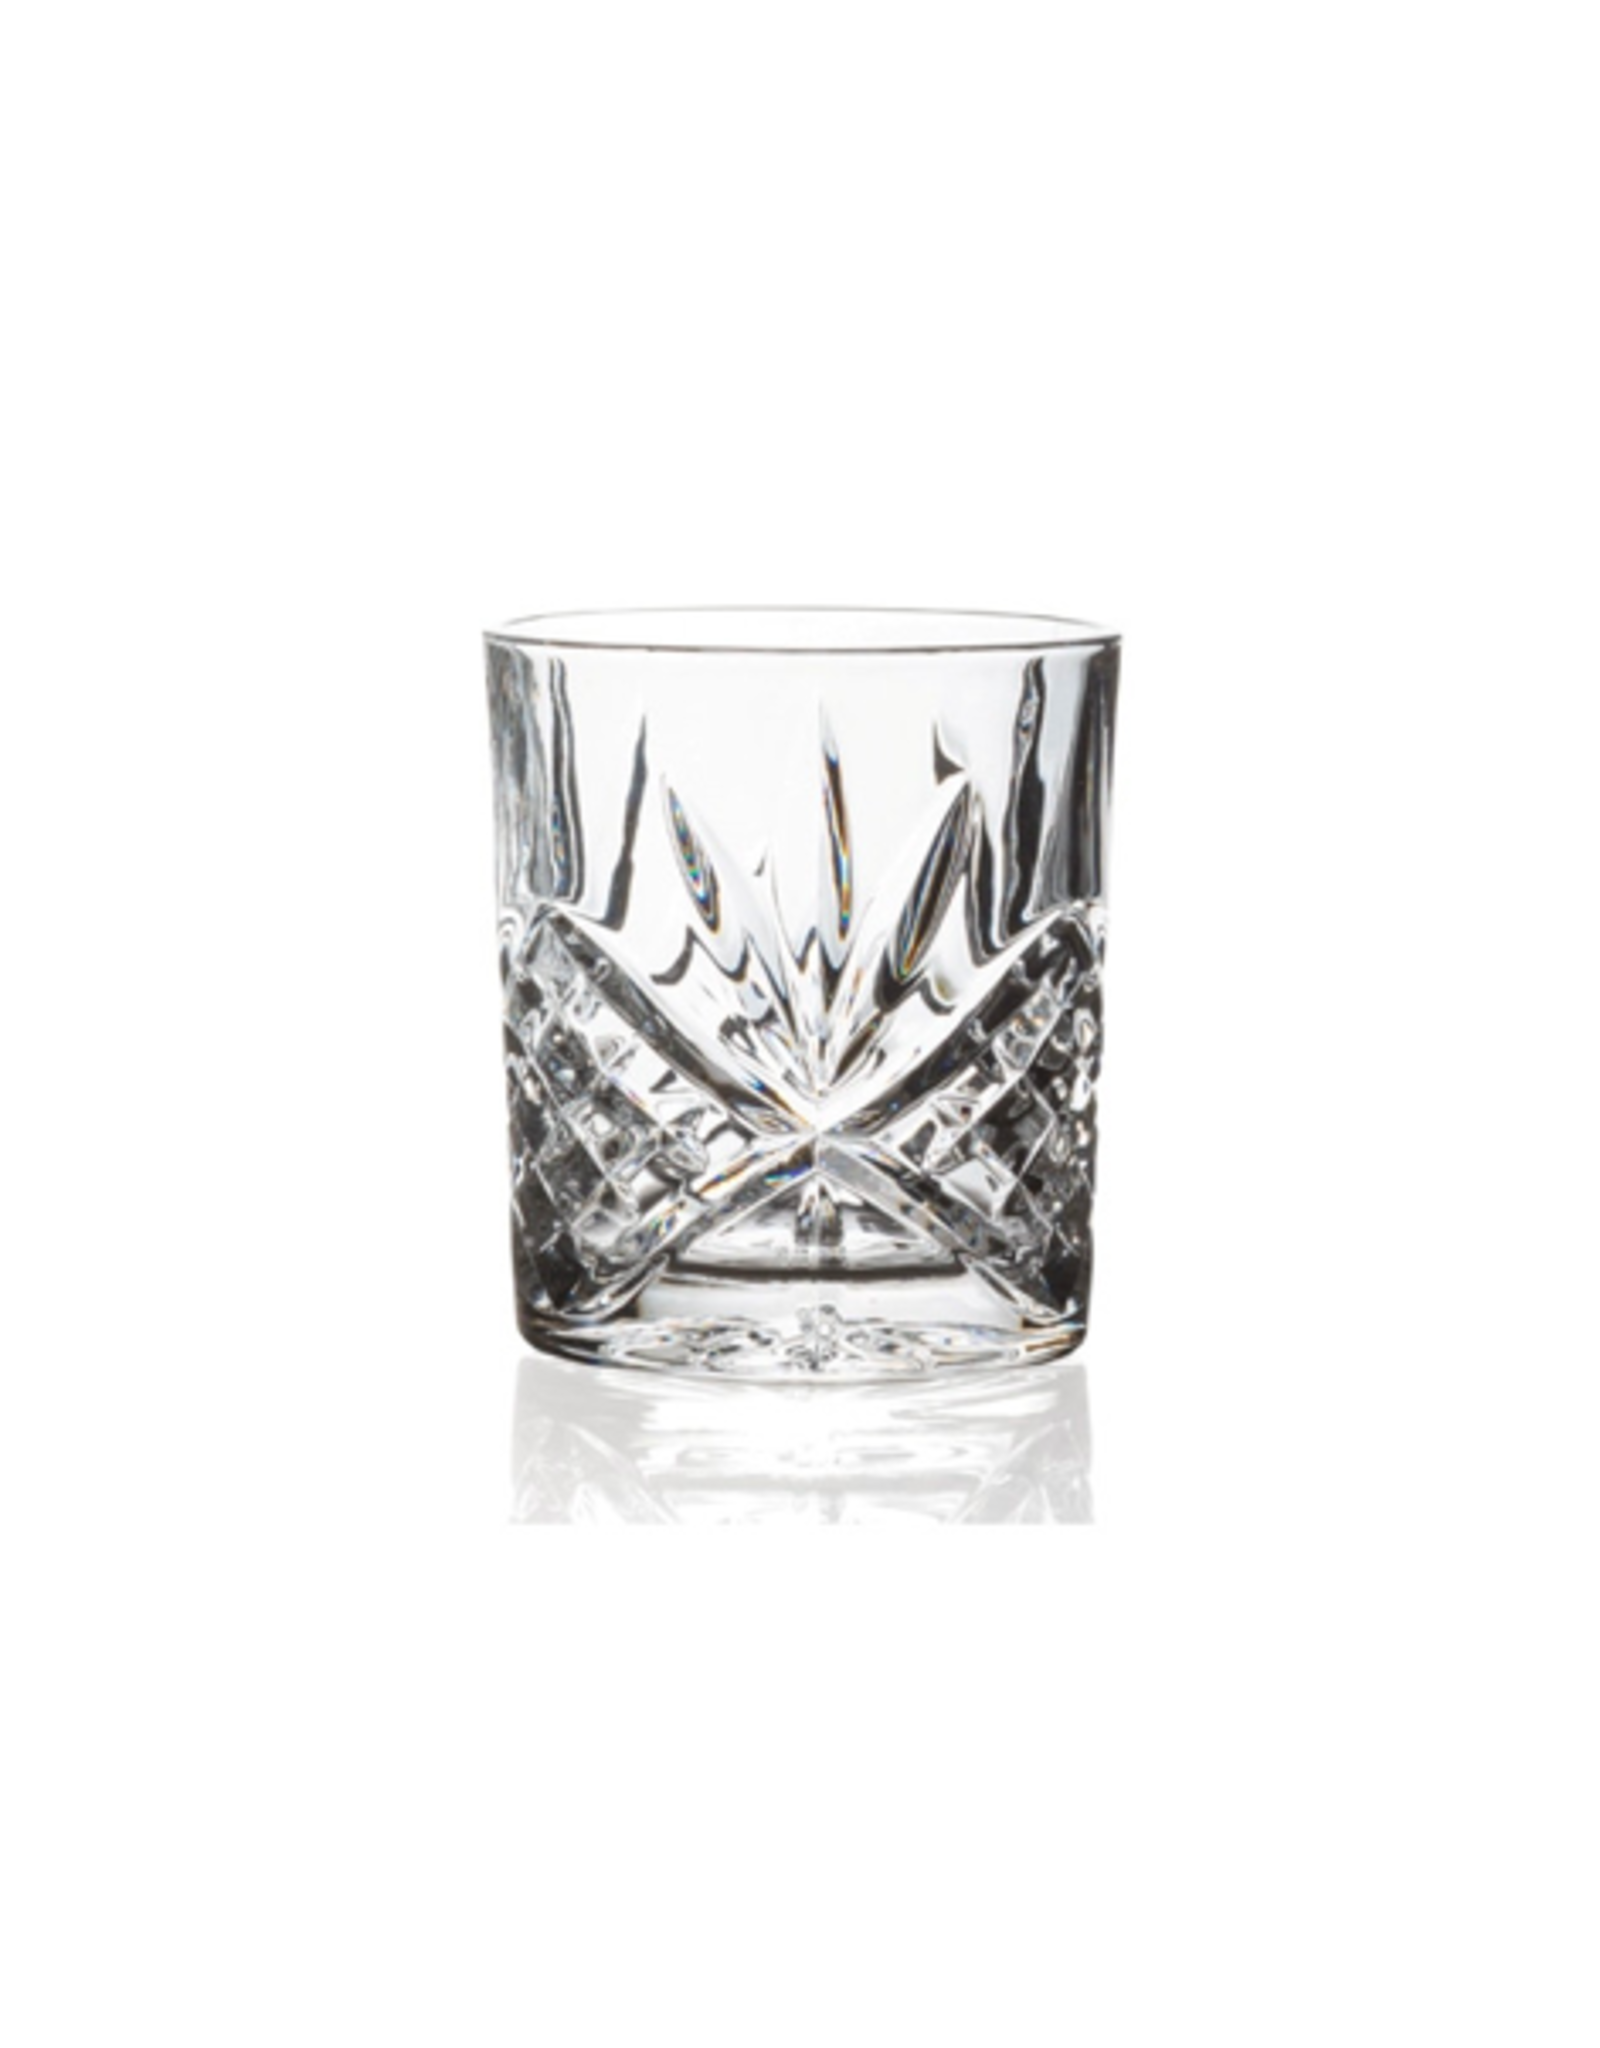 ICM - Old Fashioned Glass / Nell's, 310ml